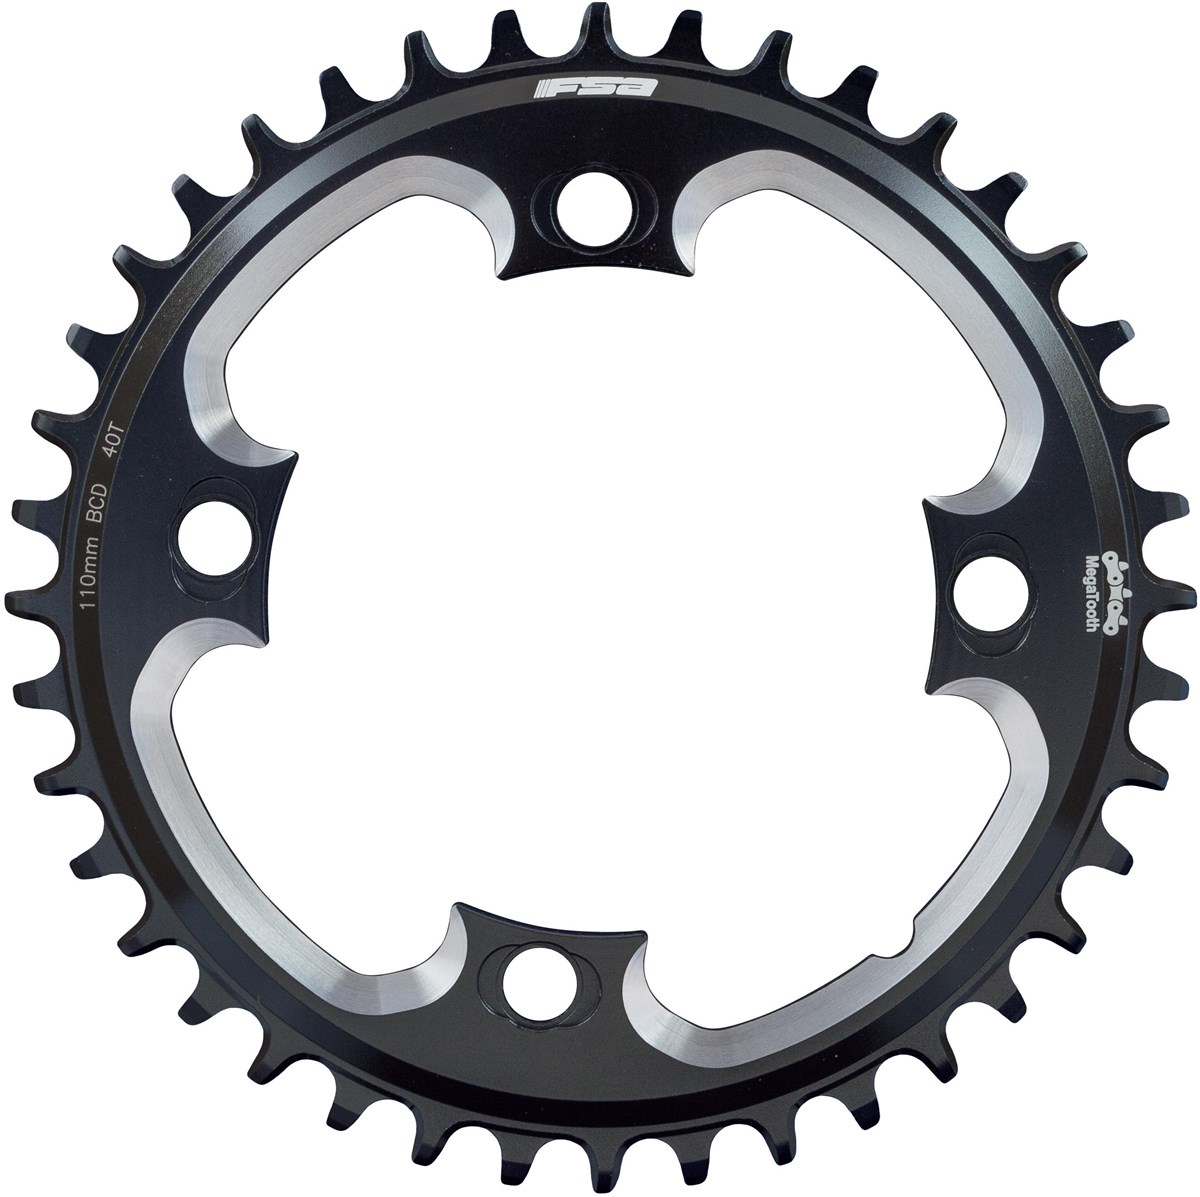 FSA SL-K ABS Road Chainring product image